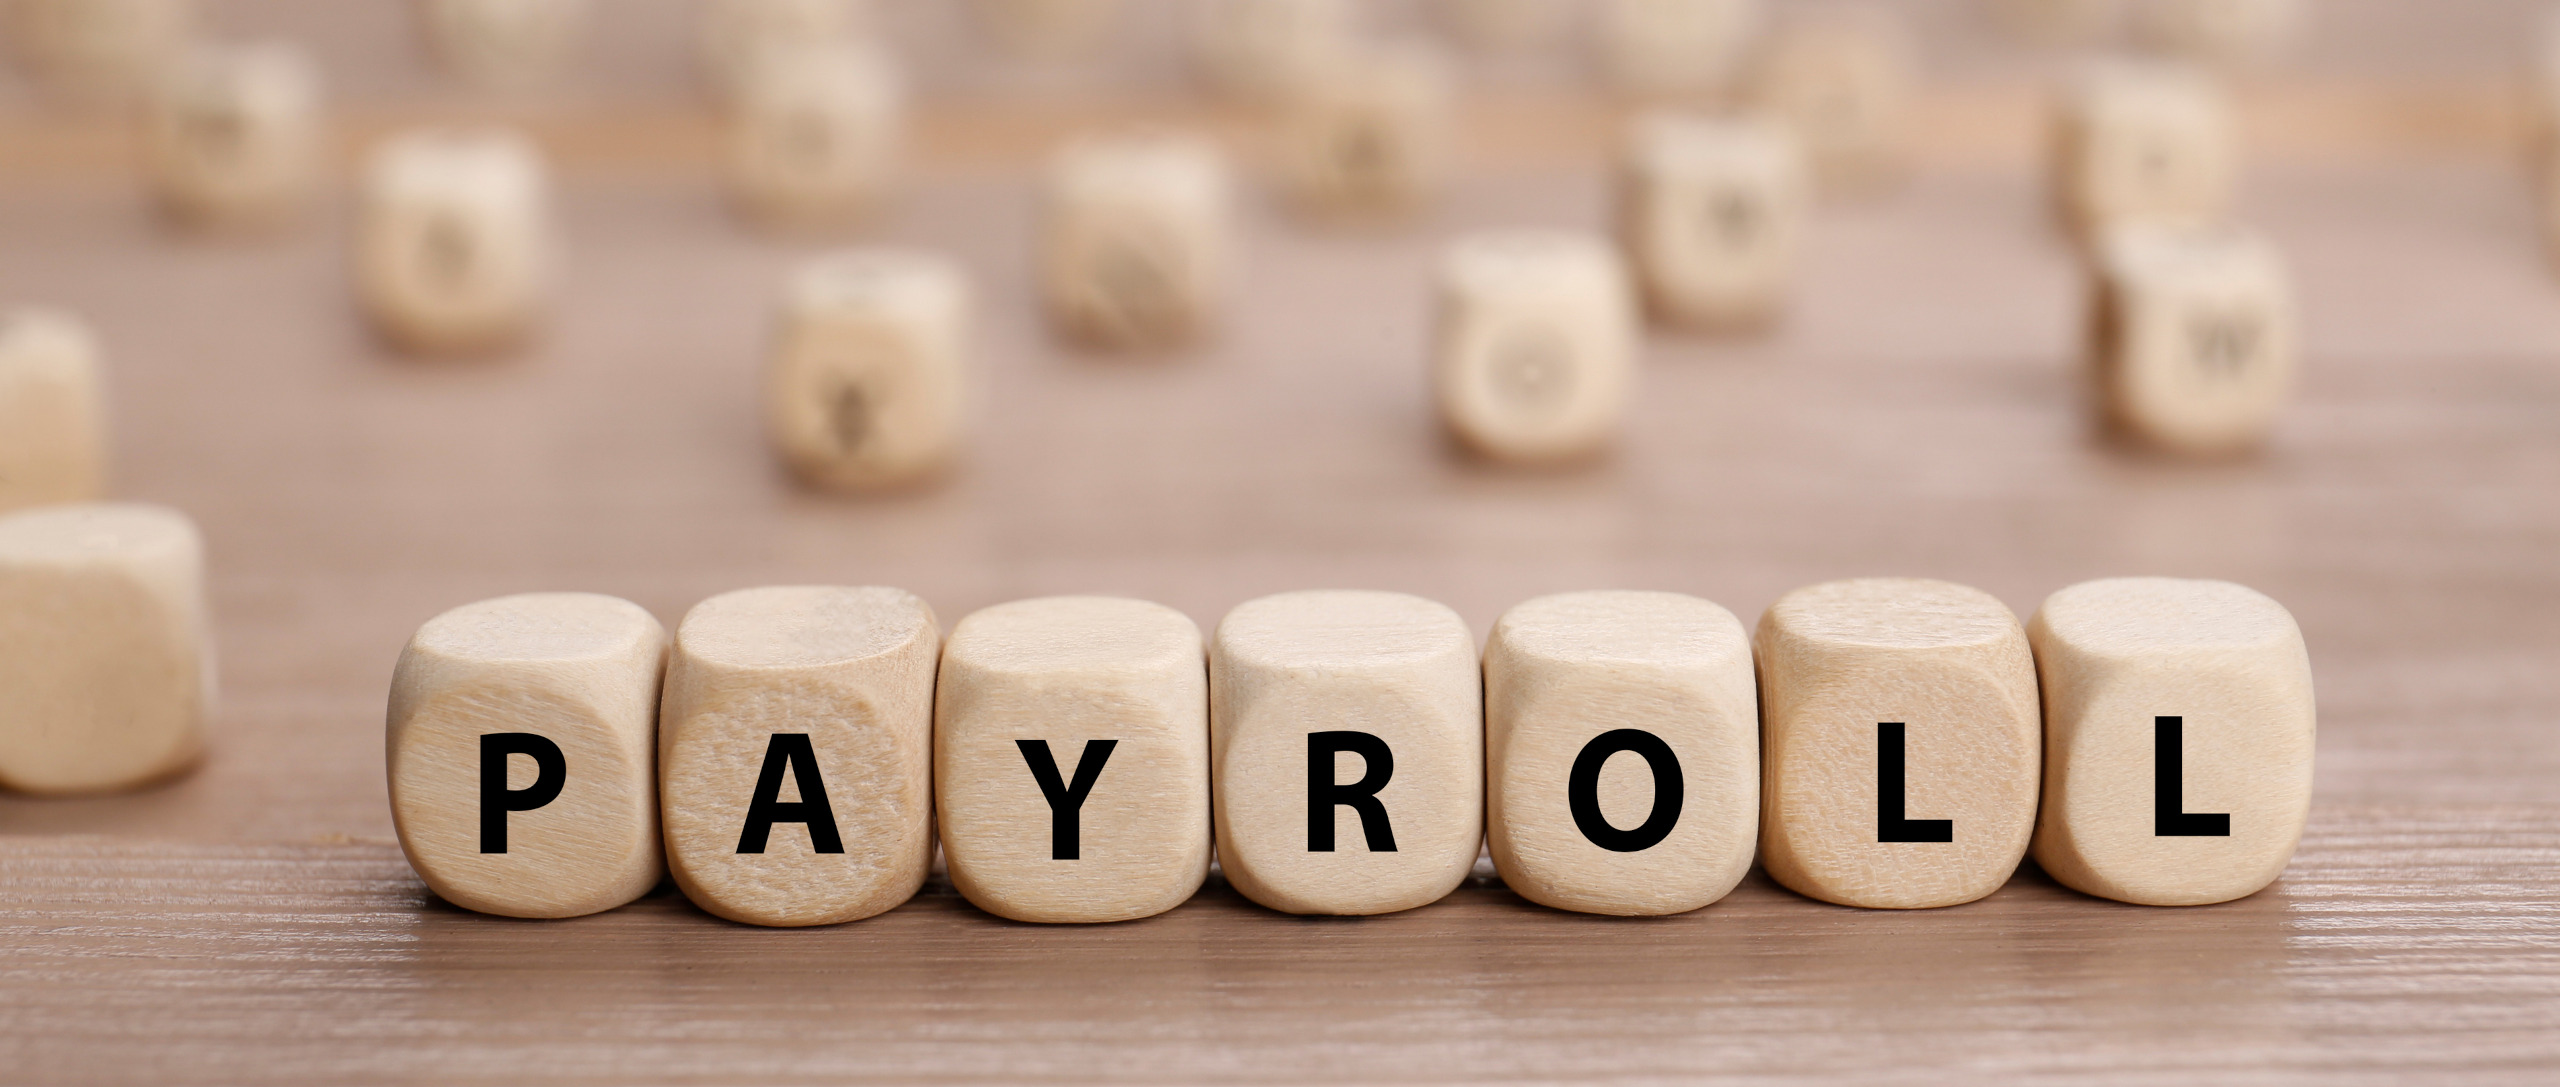 Word Payroll Made Of Cubes On Wooden Table